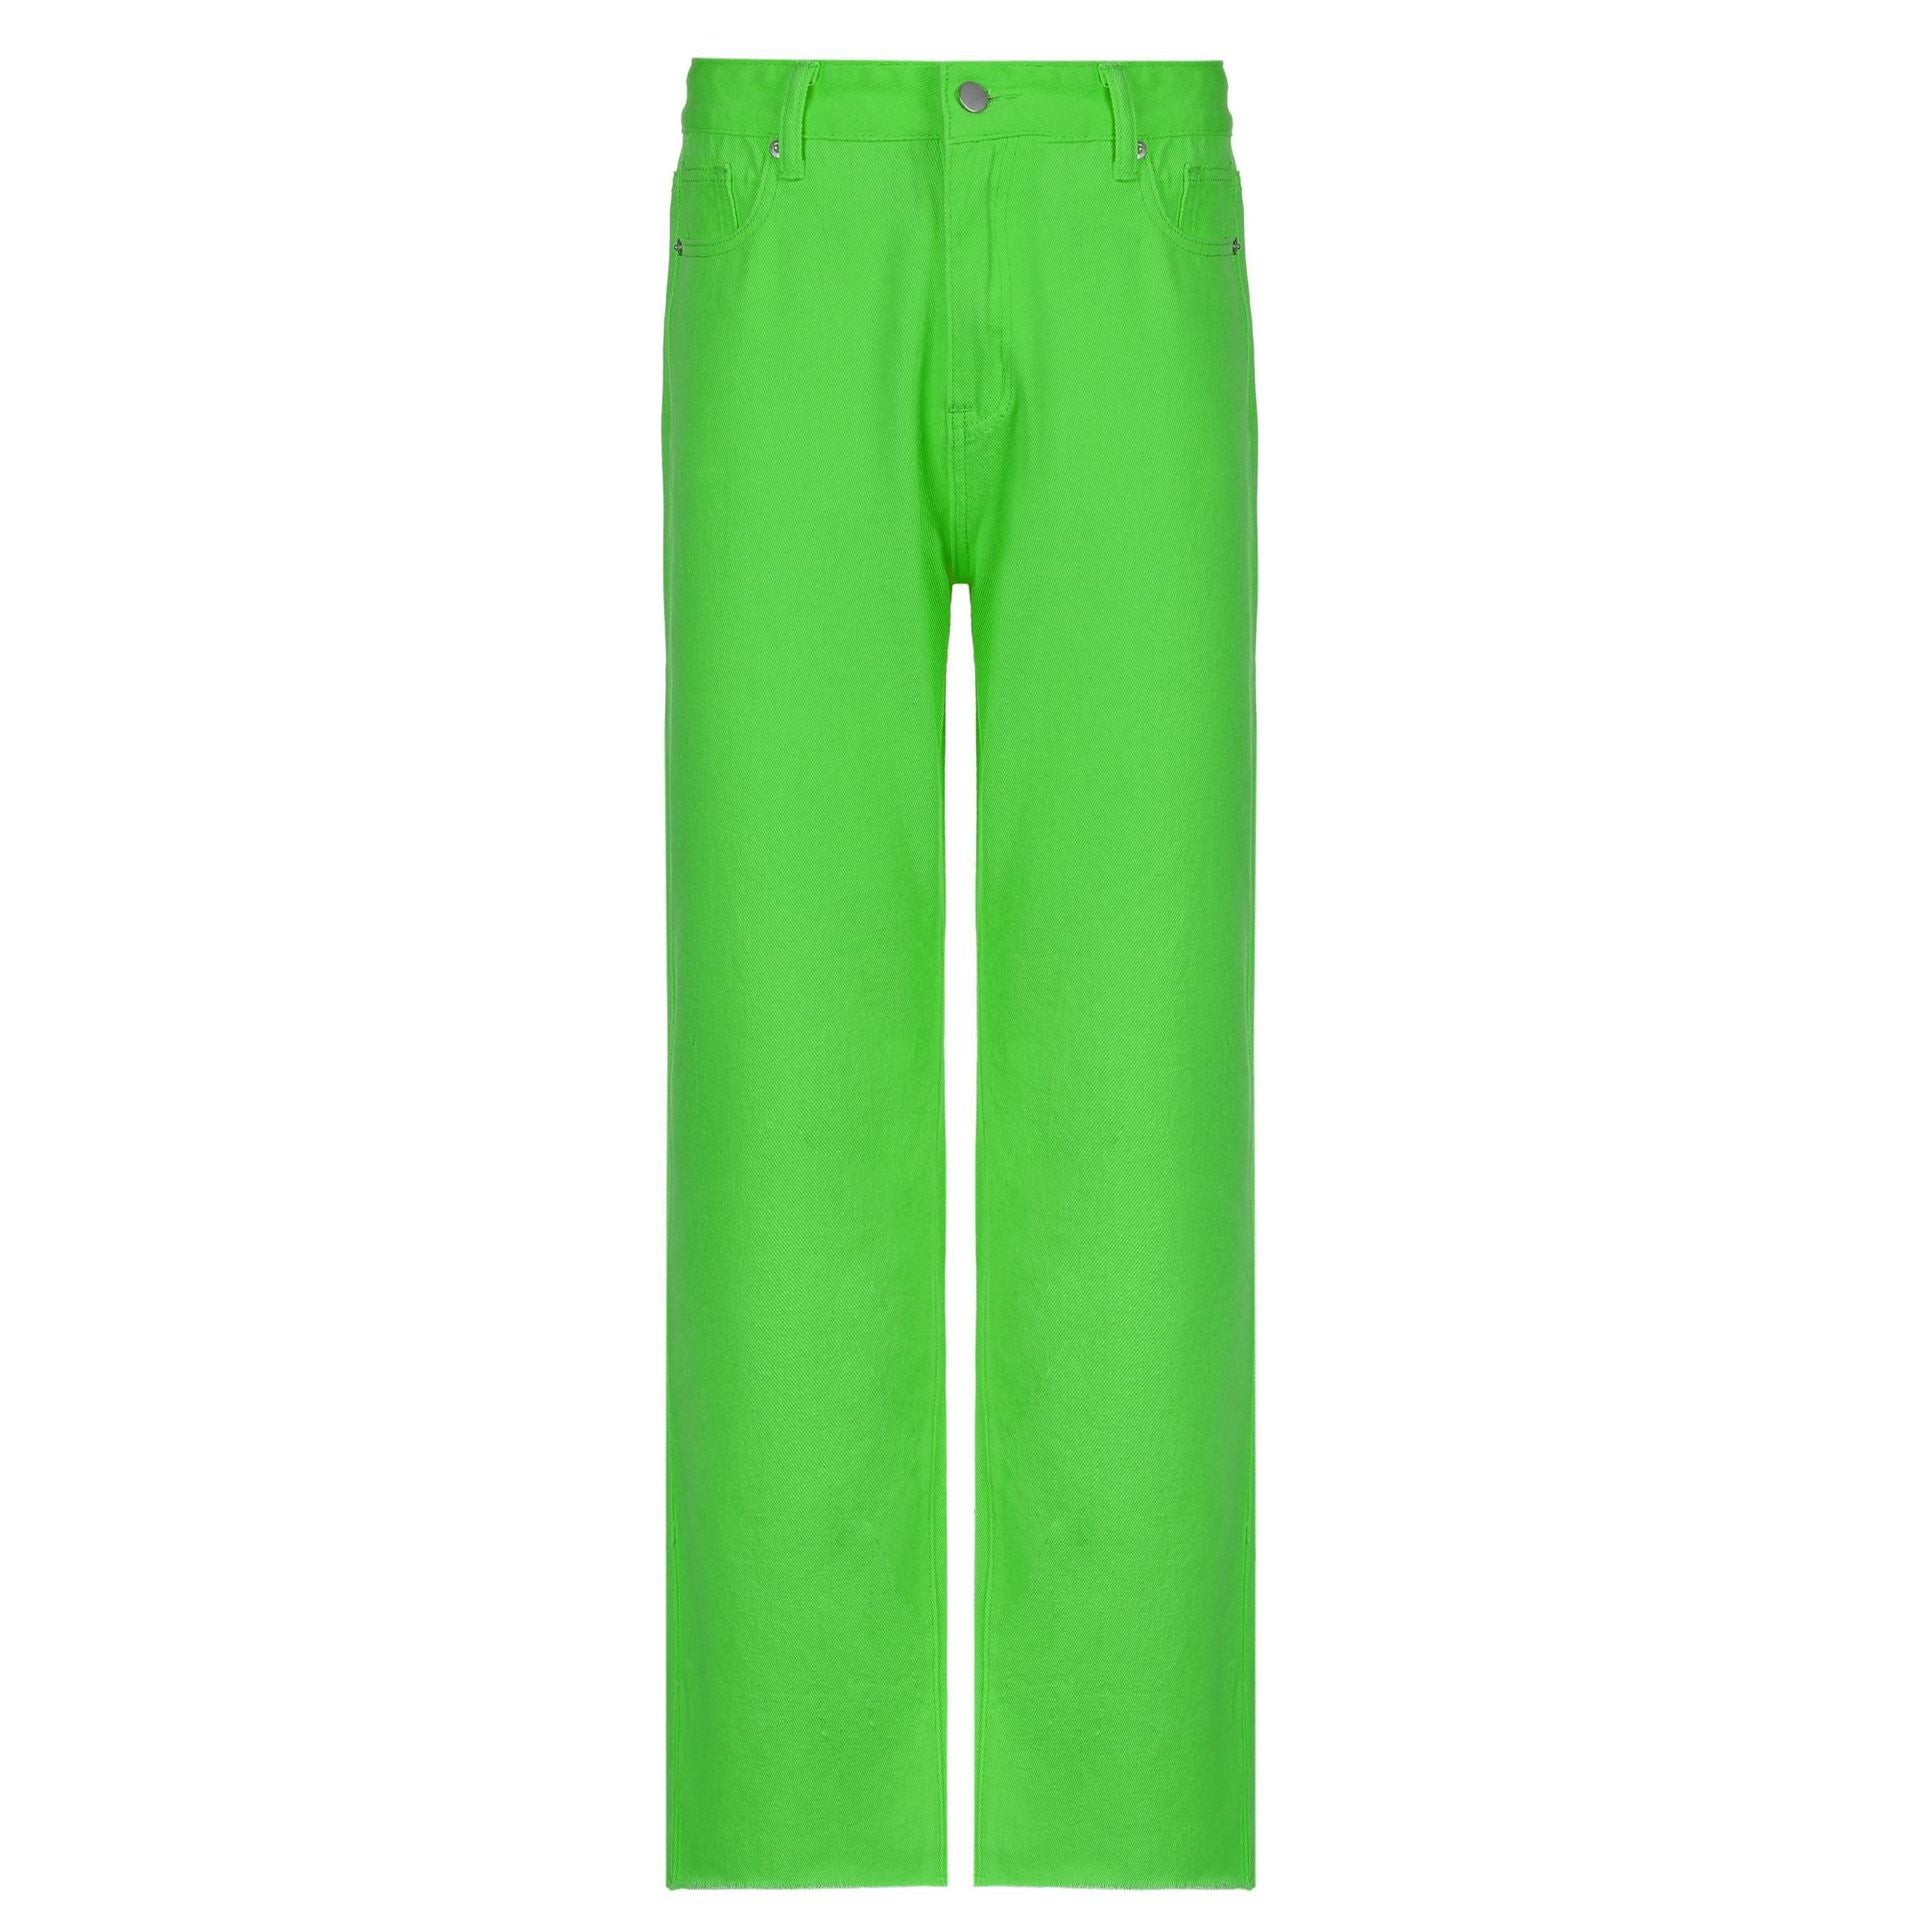 Ladies Street Candy Color High Waist Casual Straight Pants